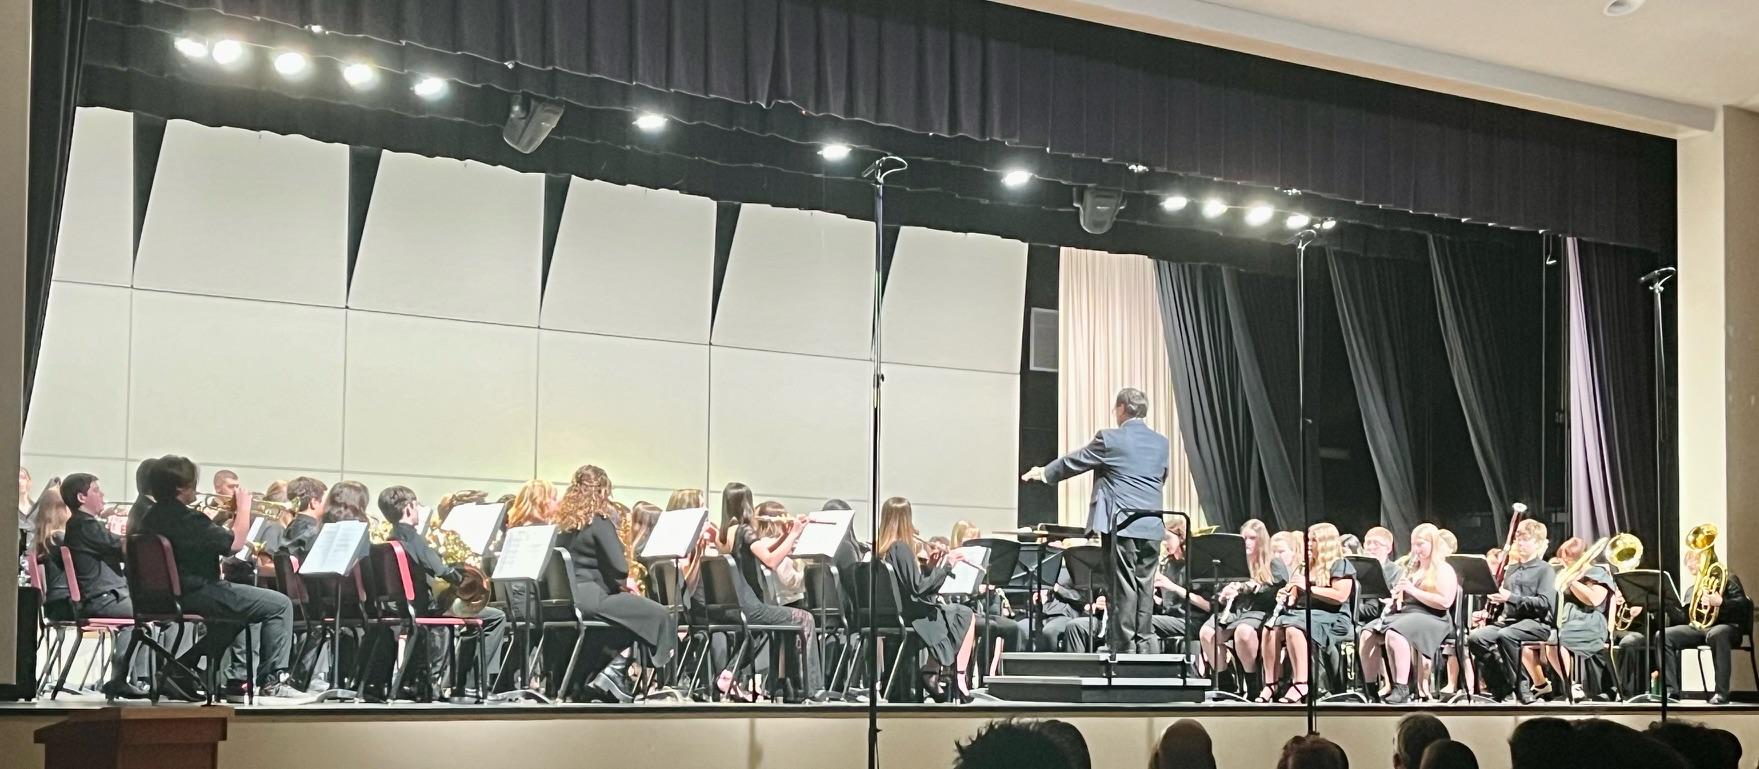 Dr. Jason Worzbyt conducts the music at the Westmoreland County Jr. High Band Festival